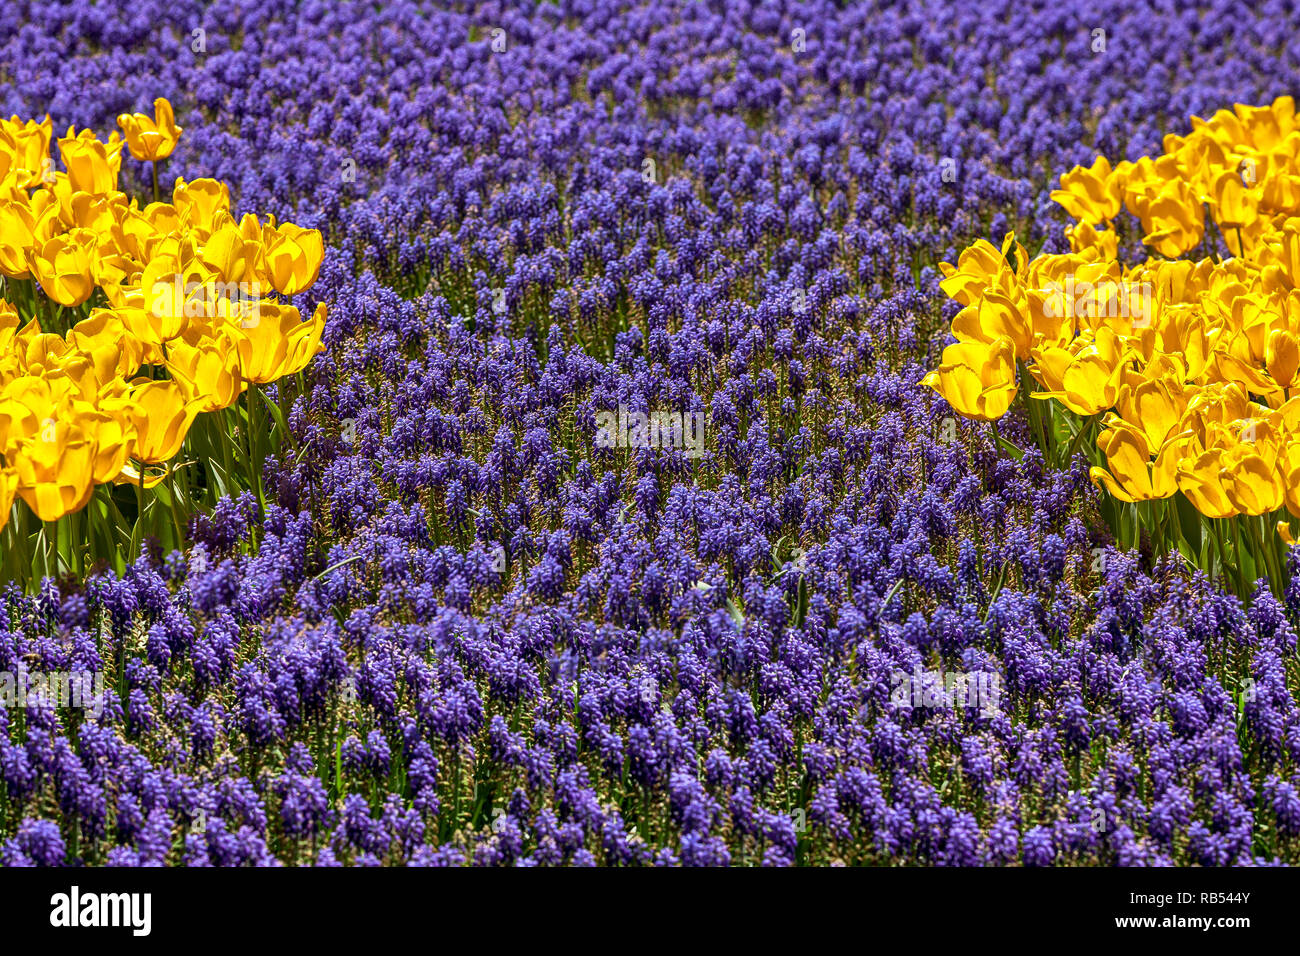 yellow tulips and blue muscari spring flowers Stock Photo